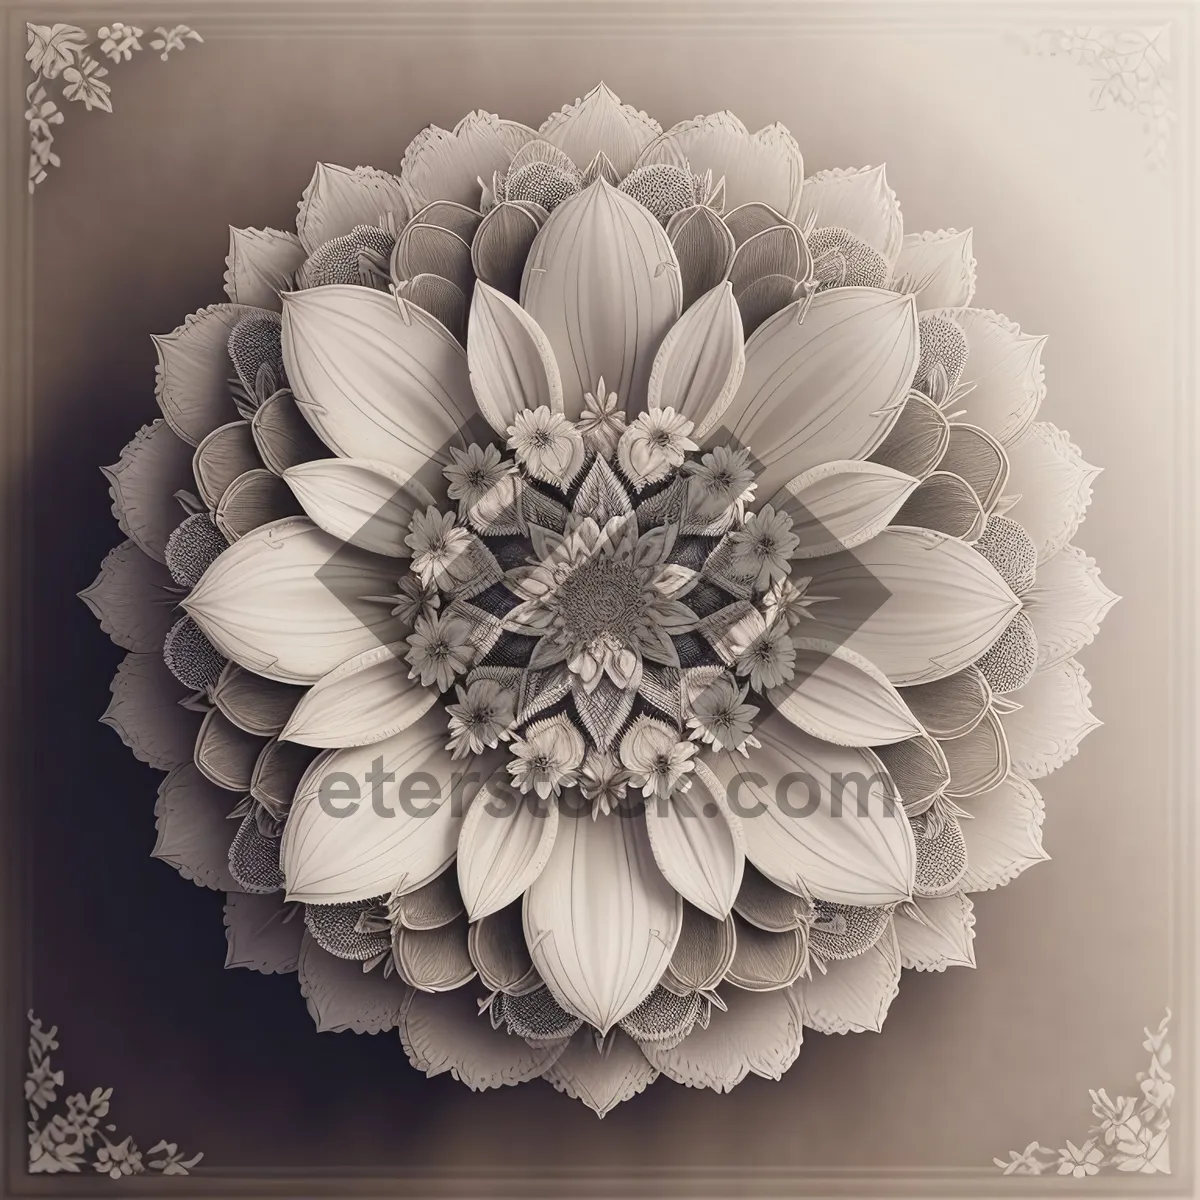 Picture of Vintage Damask Floral Wallpaper Graphic